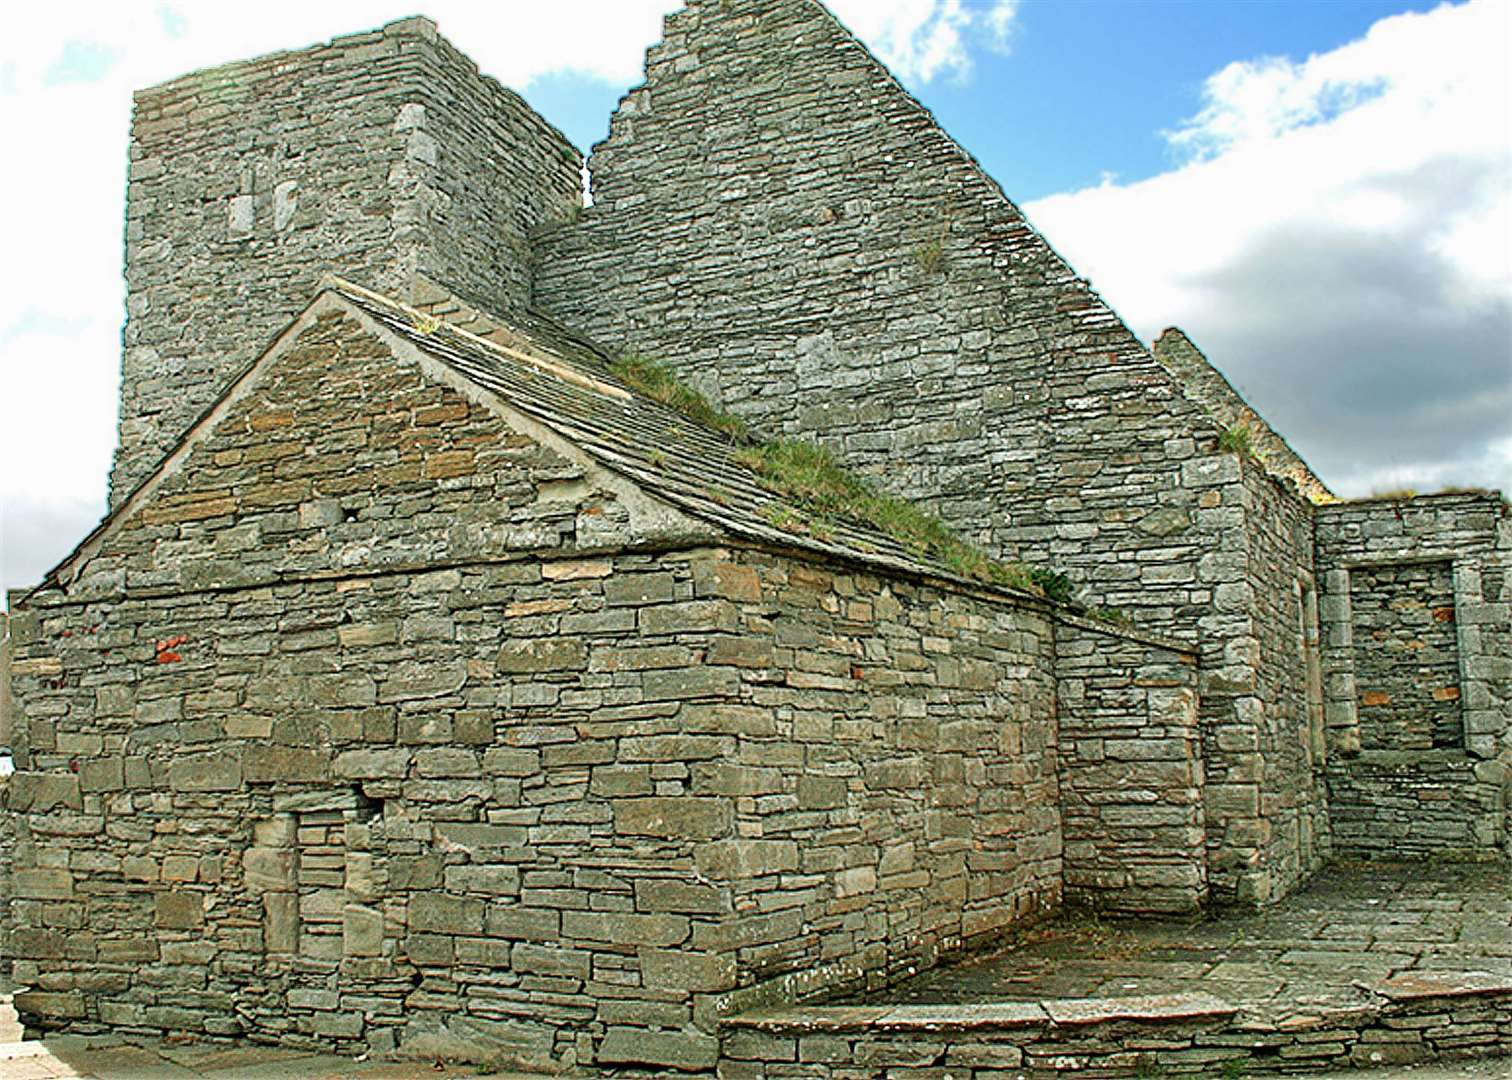 The remains of the Session House, where trials were held and punishments given.